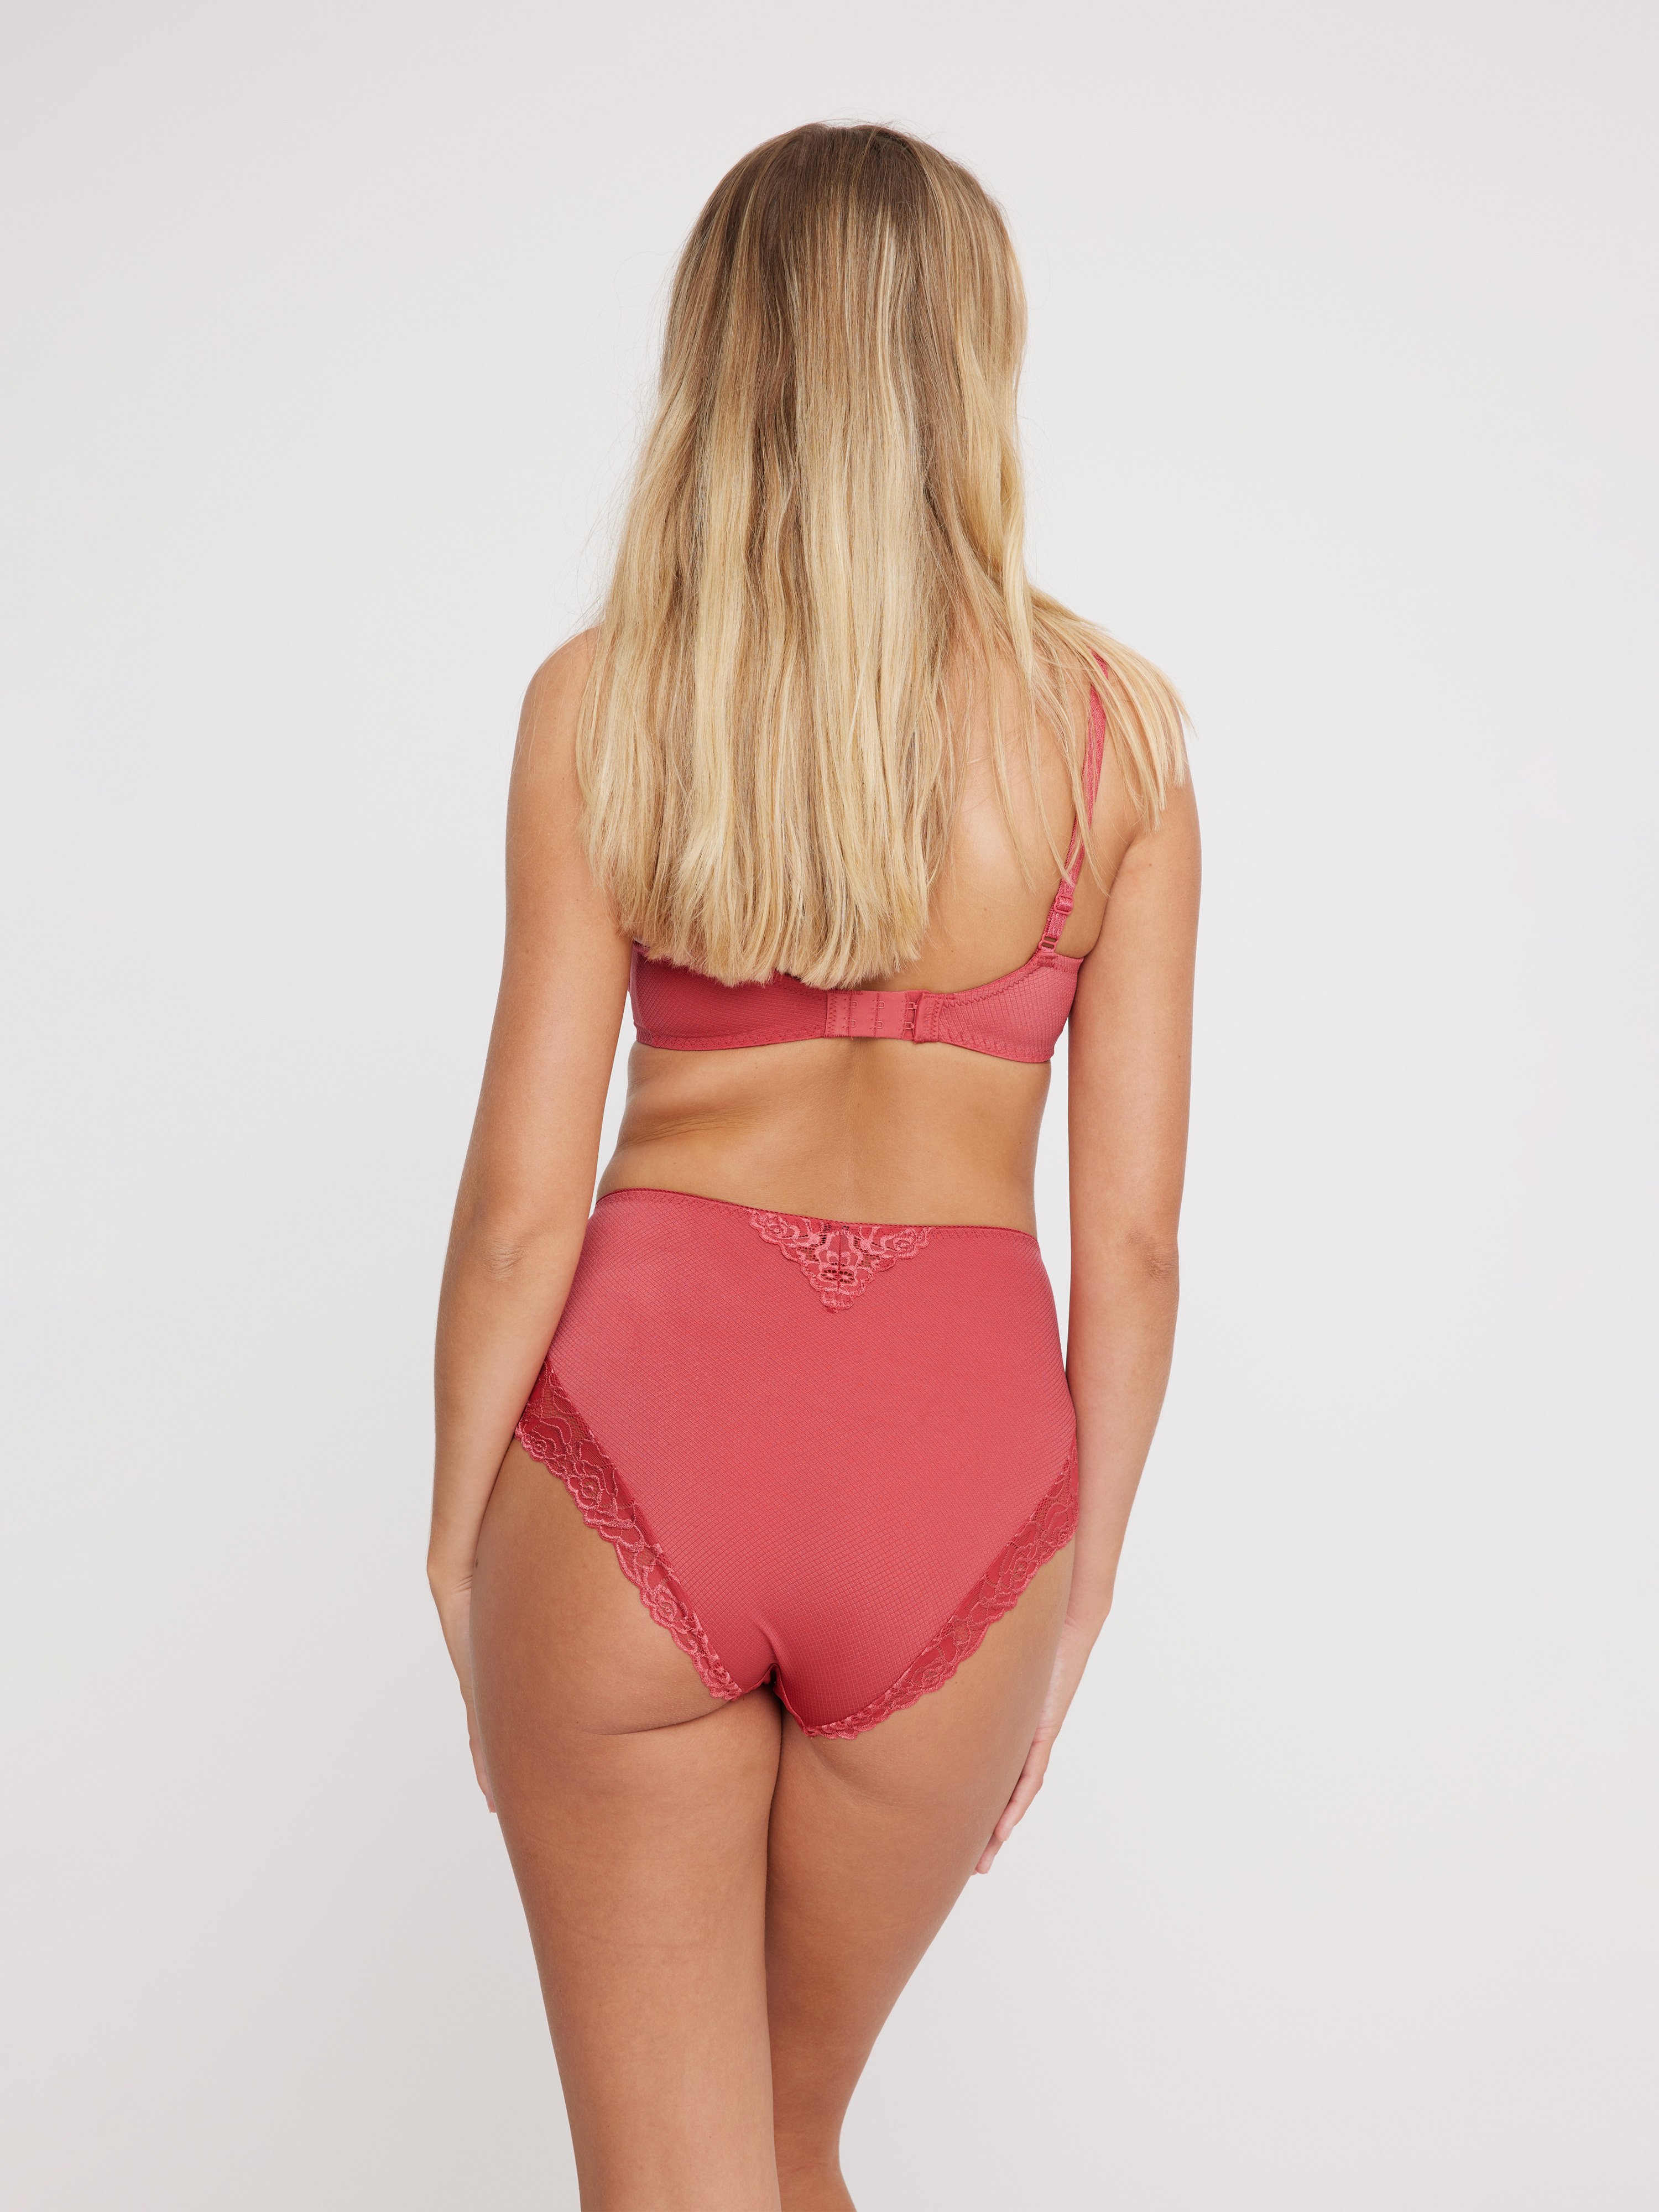 Florence High Waist Tai - Holly Berry - CA$7.80 - CHANGE Lingerie